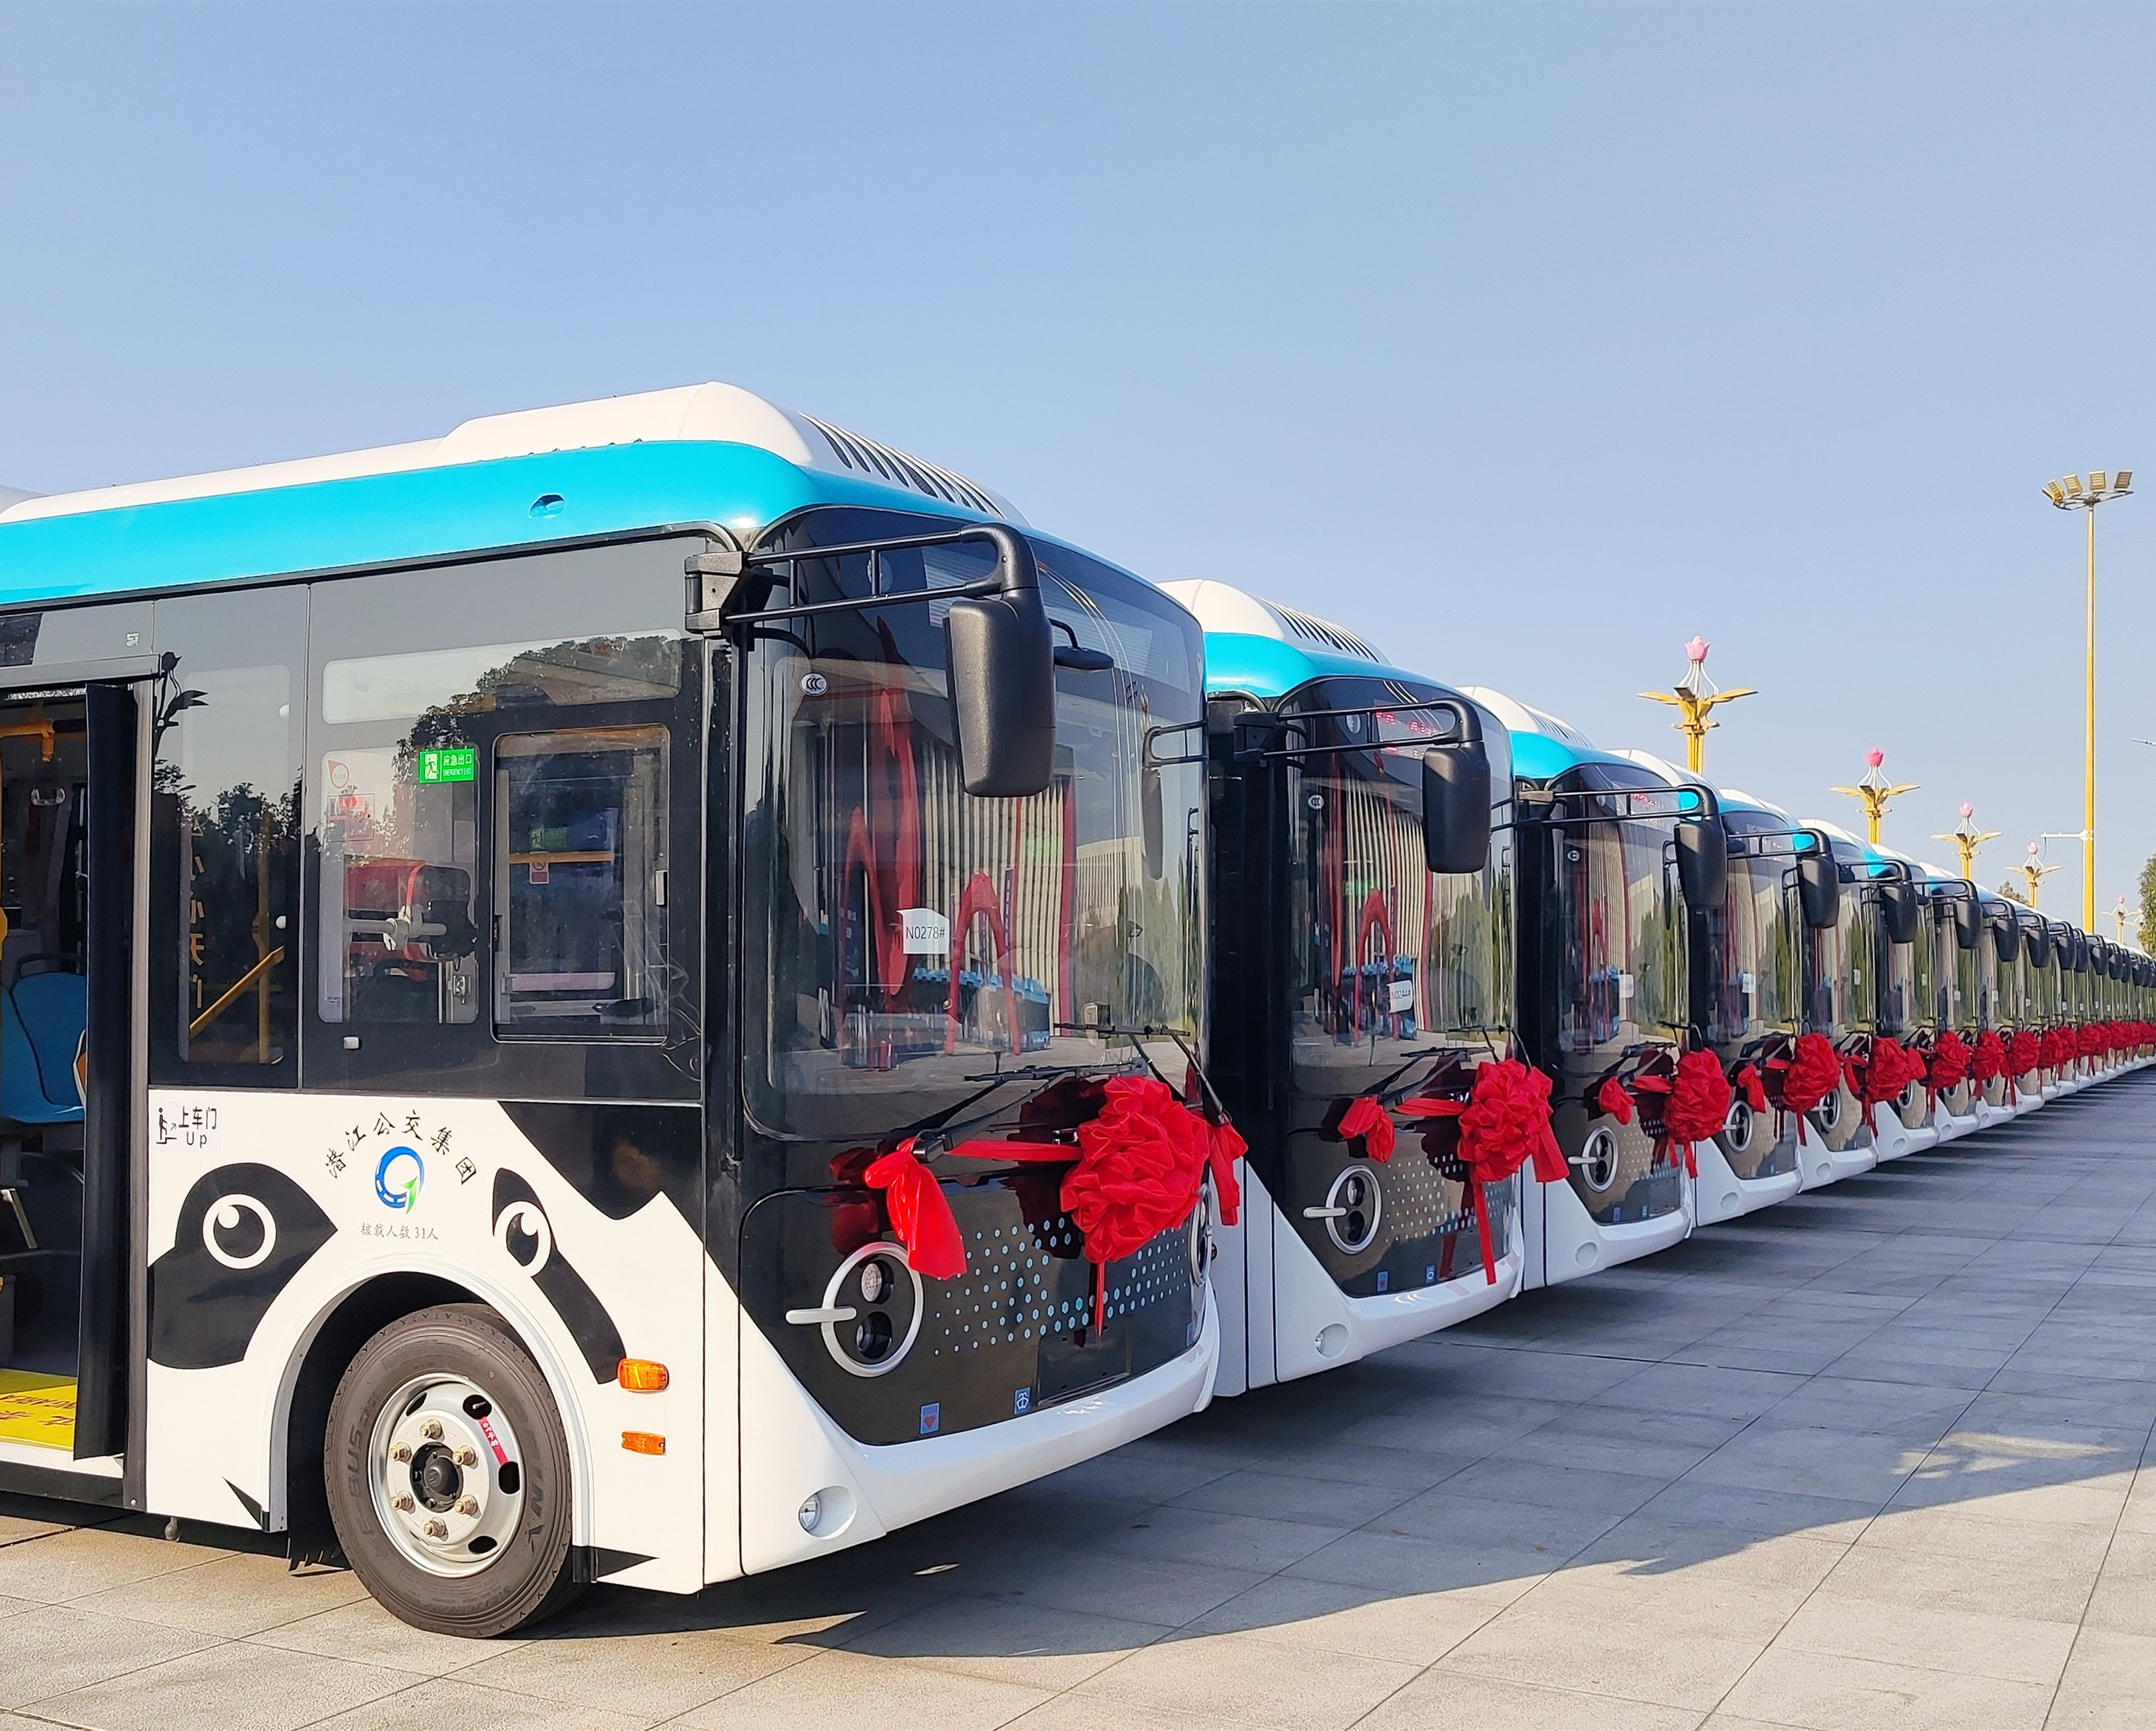 BAZN AUTO—ZONSON SMART AUTO CORPORATION-Zonson Smart Auto help Qianjiang Village in Hubei Province to connect public buses